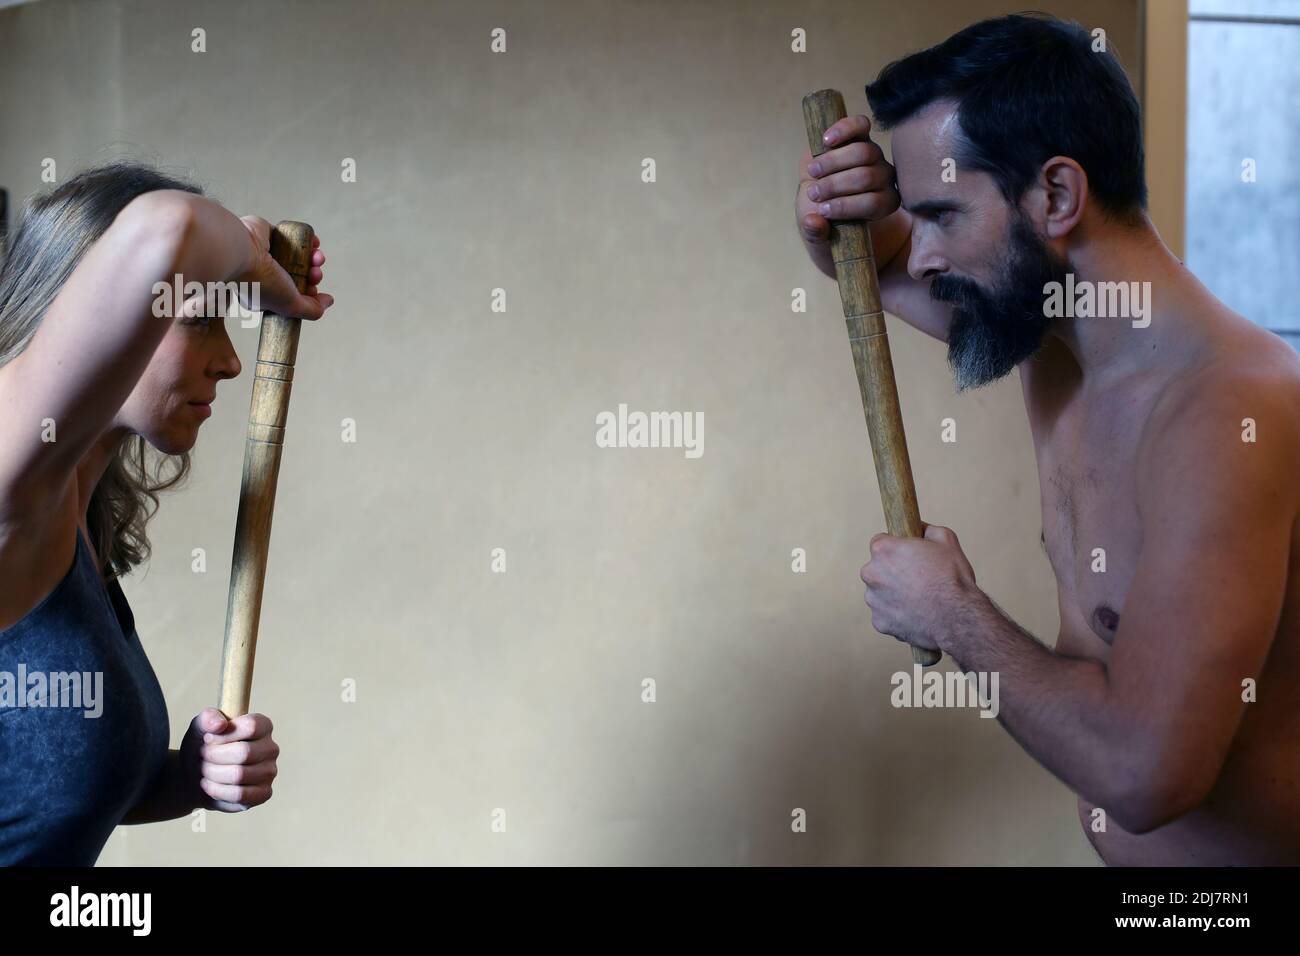 Stick fighting Thailand with participants practicing the ancient martial  art of Krabi Krabong stick fighting. Thailand S. E. Asia Stock Photo - Alamy